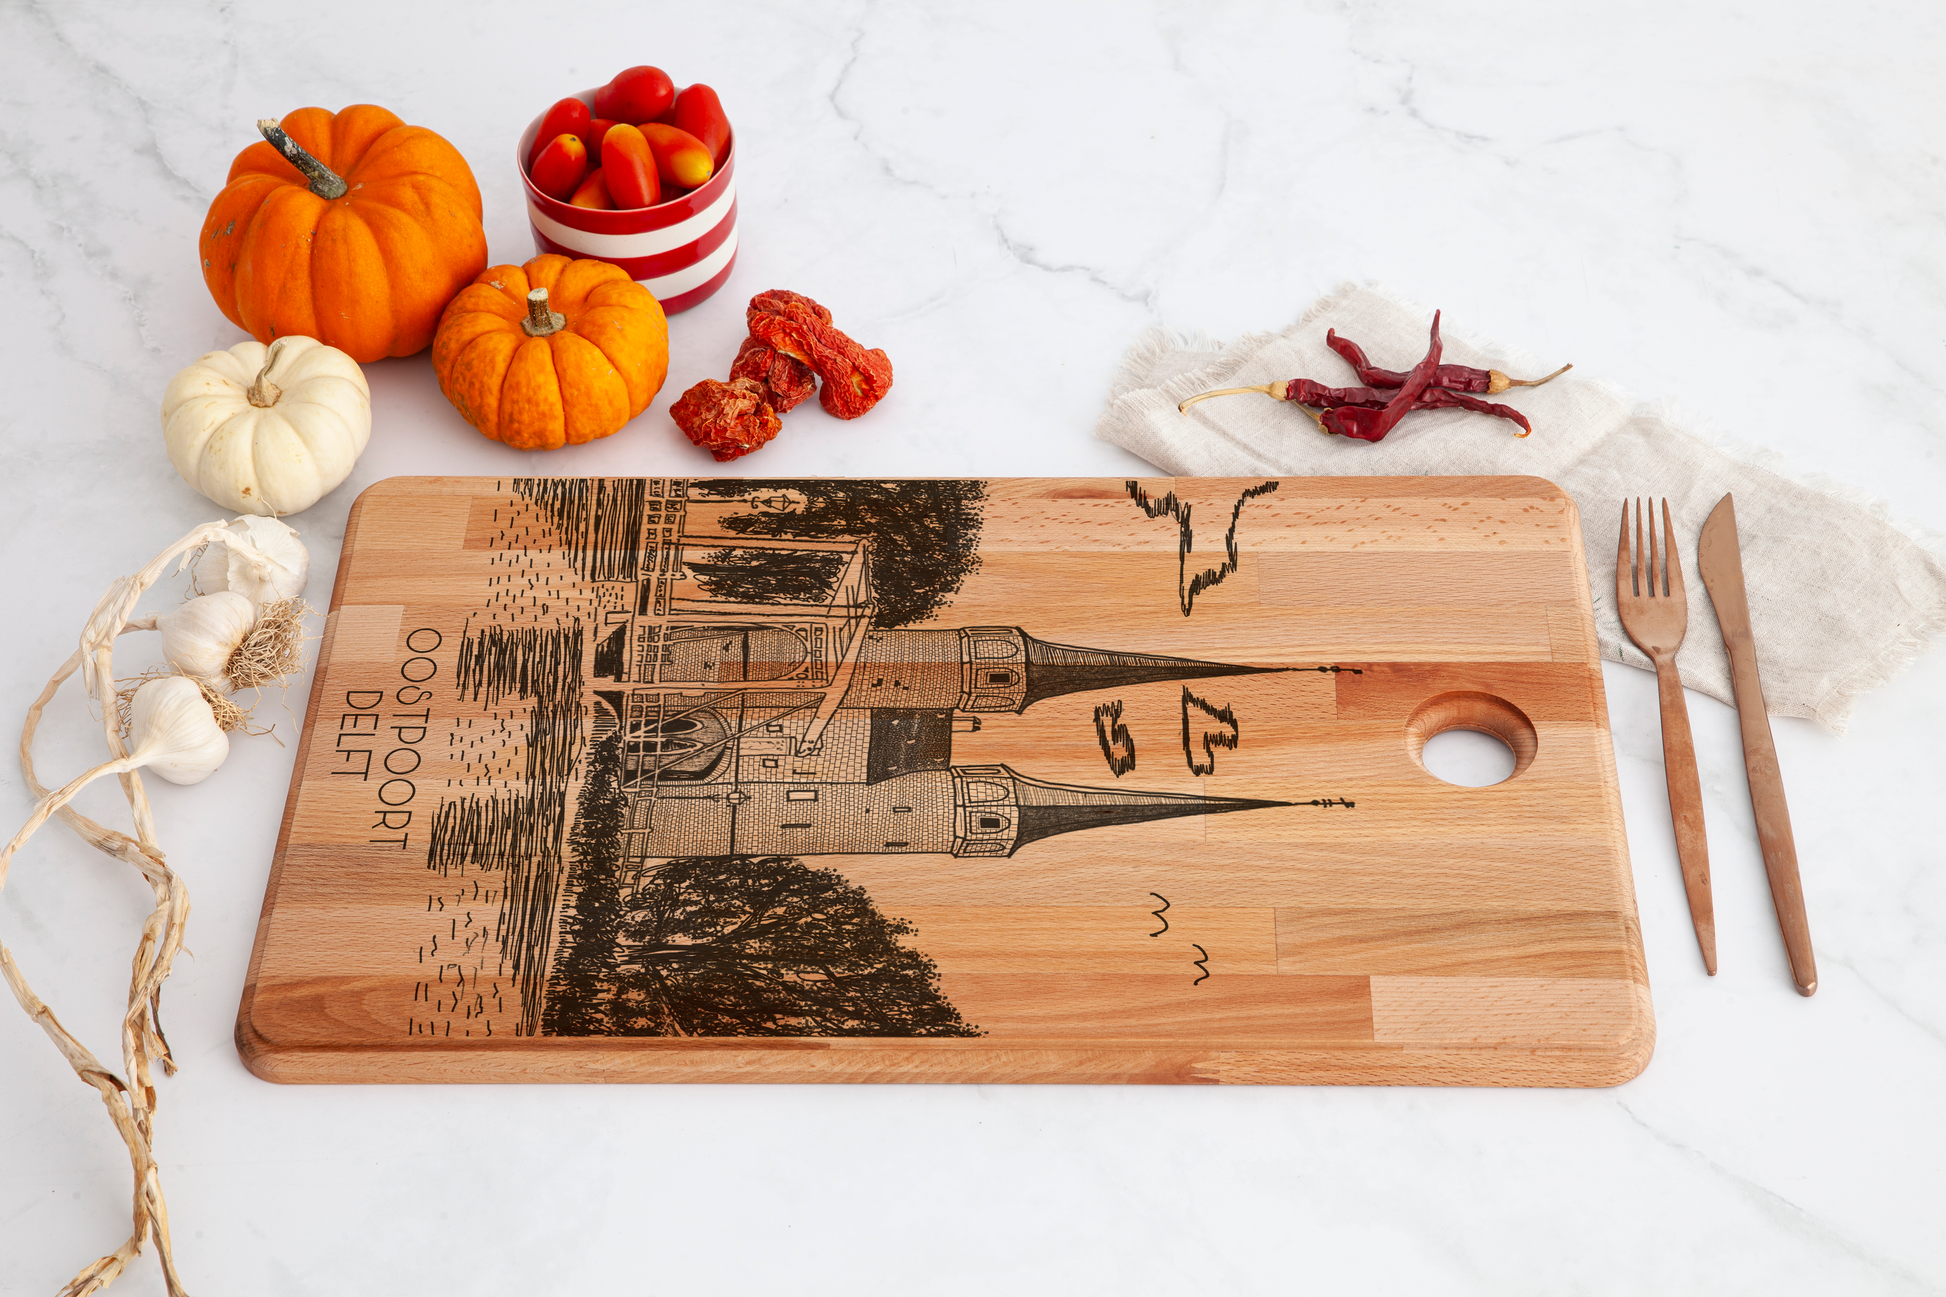 Delft, Oostpoort, cutting board, with knife